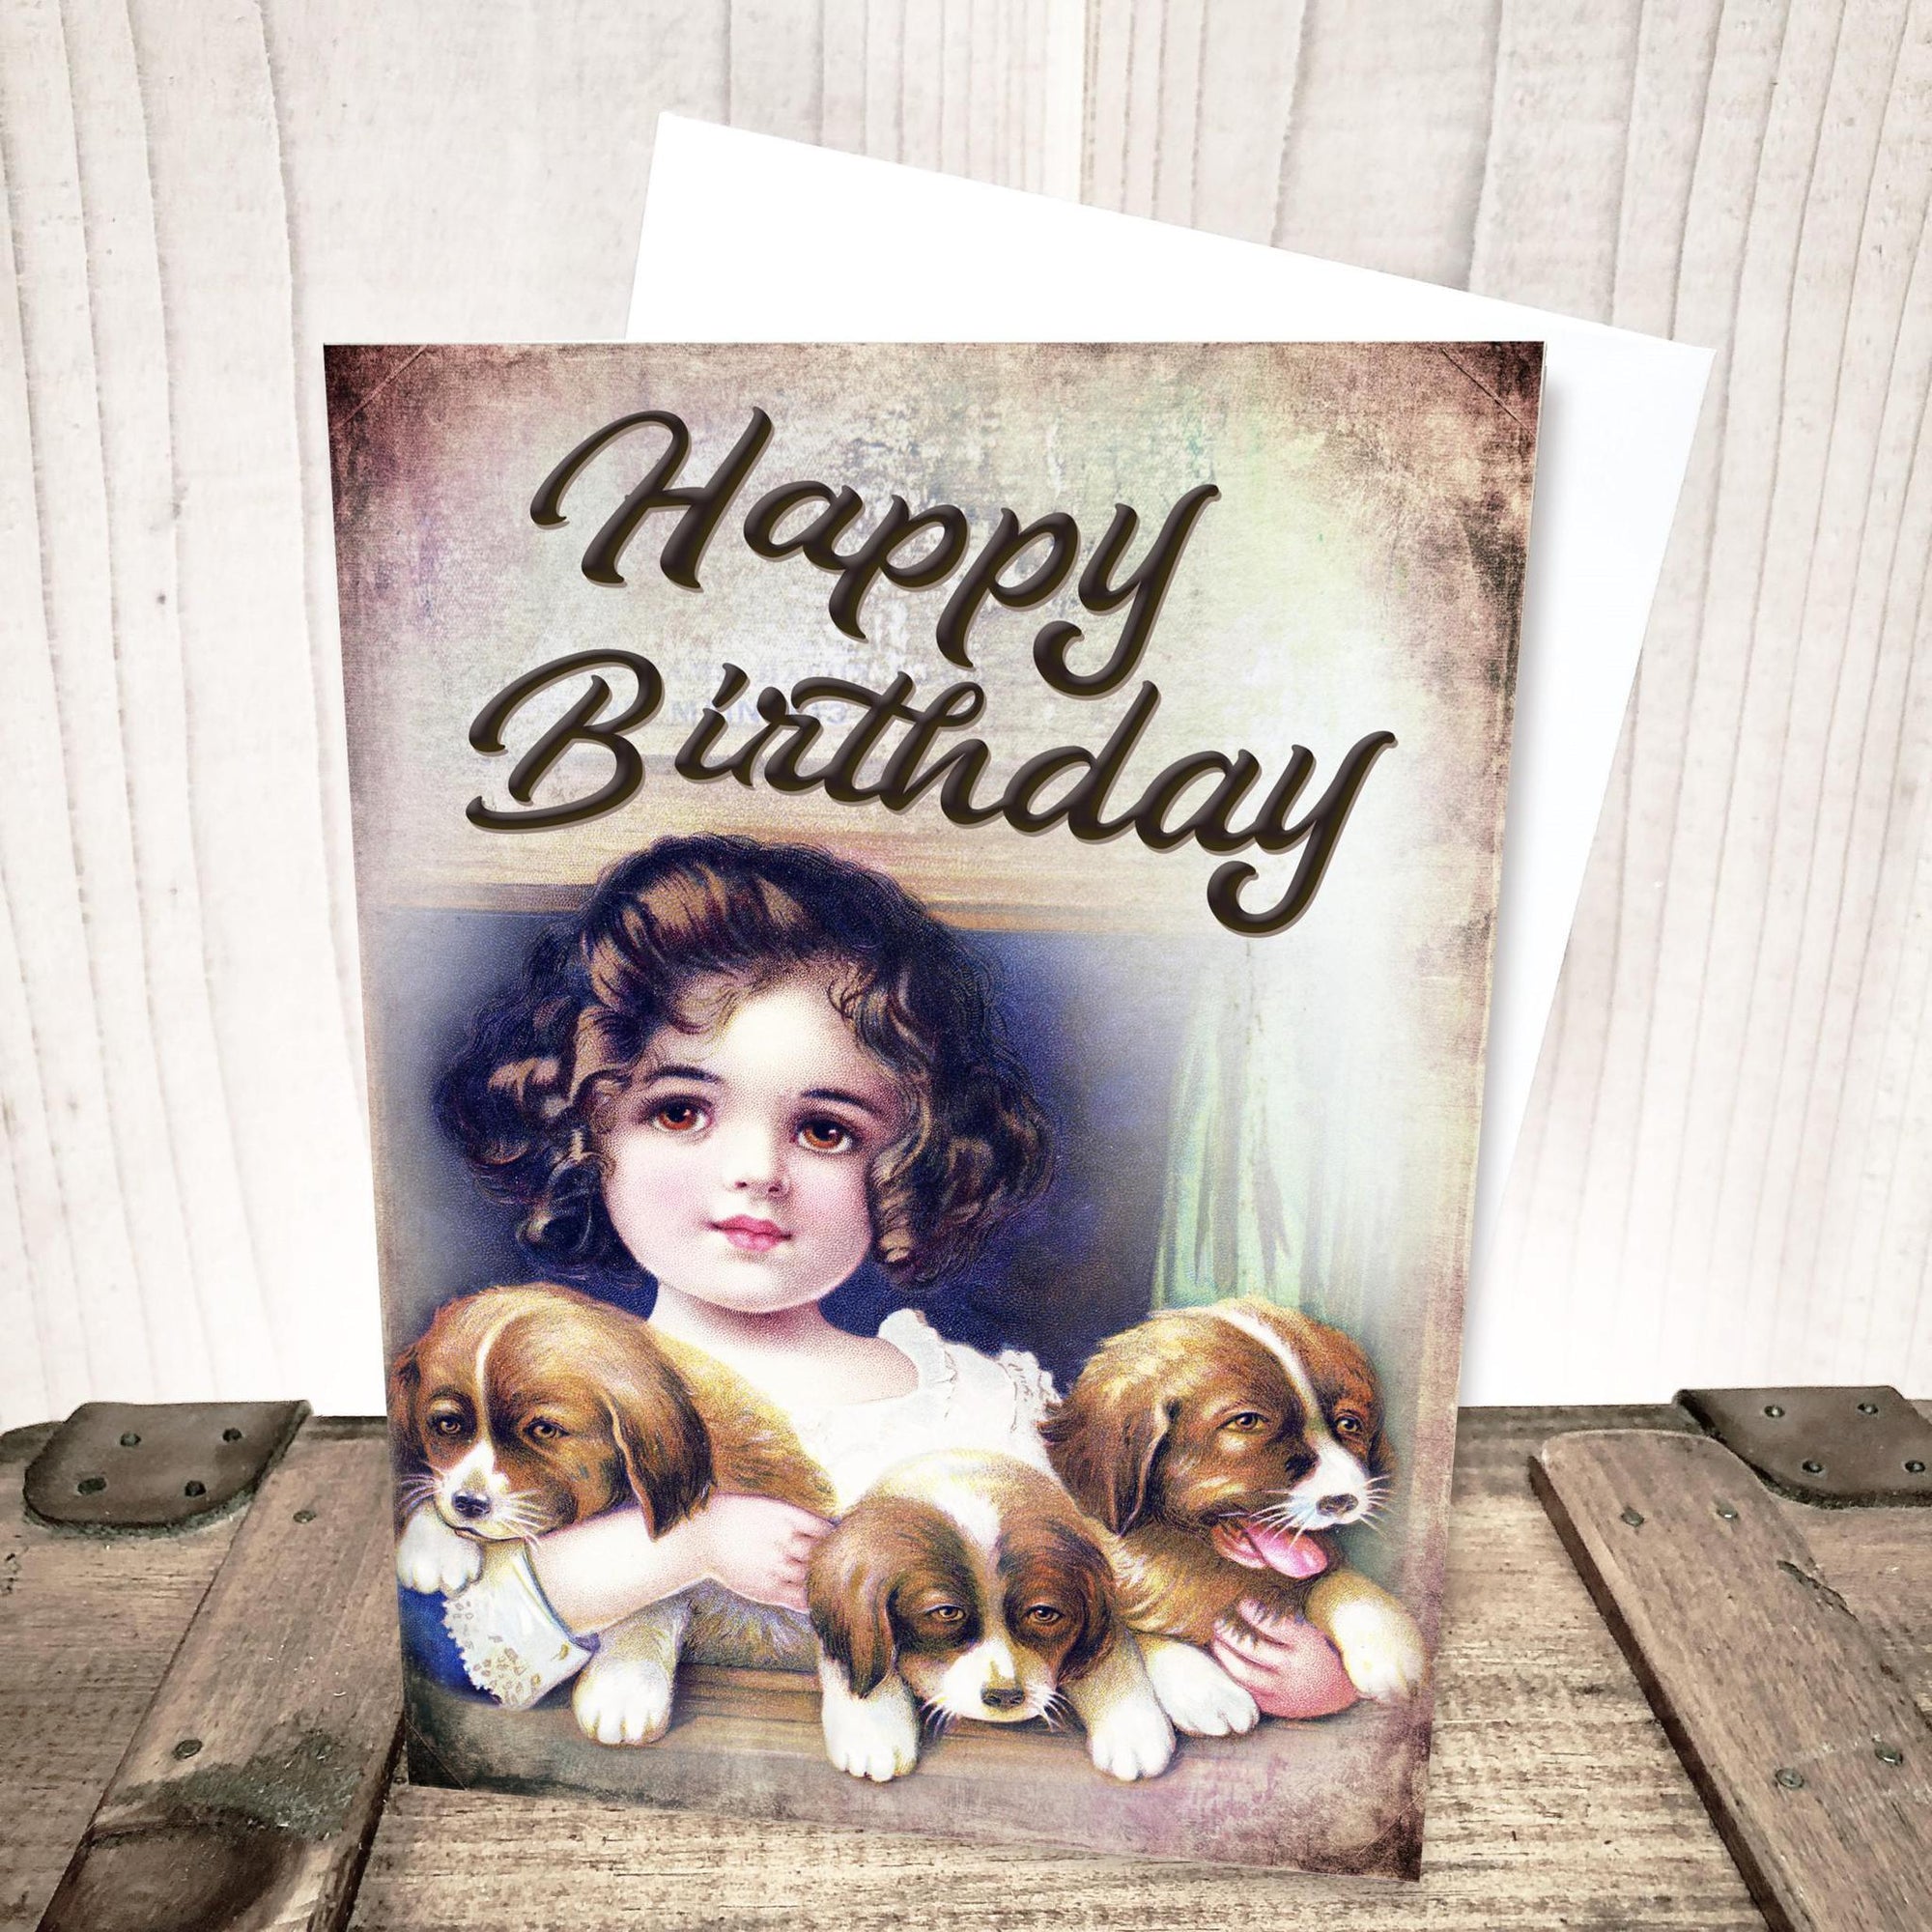 Girl with Puppies Birthday Card by Yesterday's Best